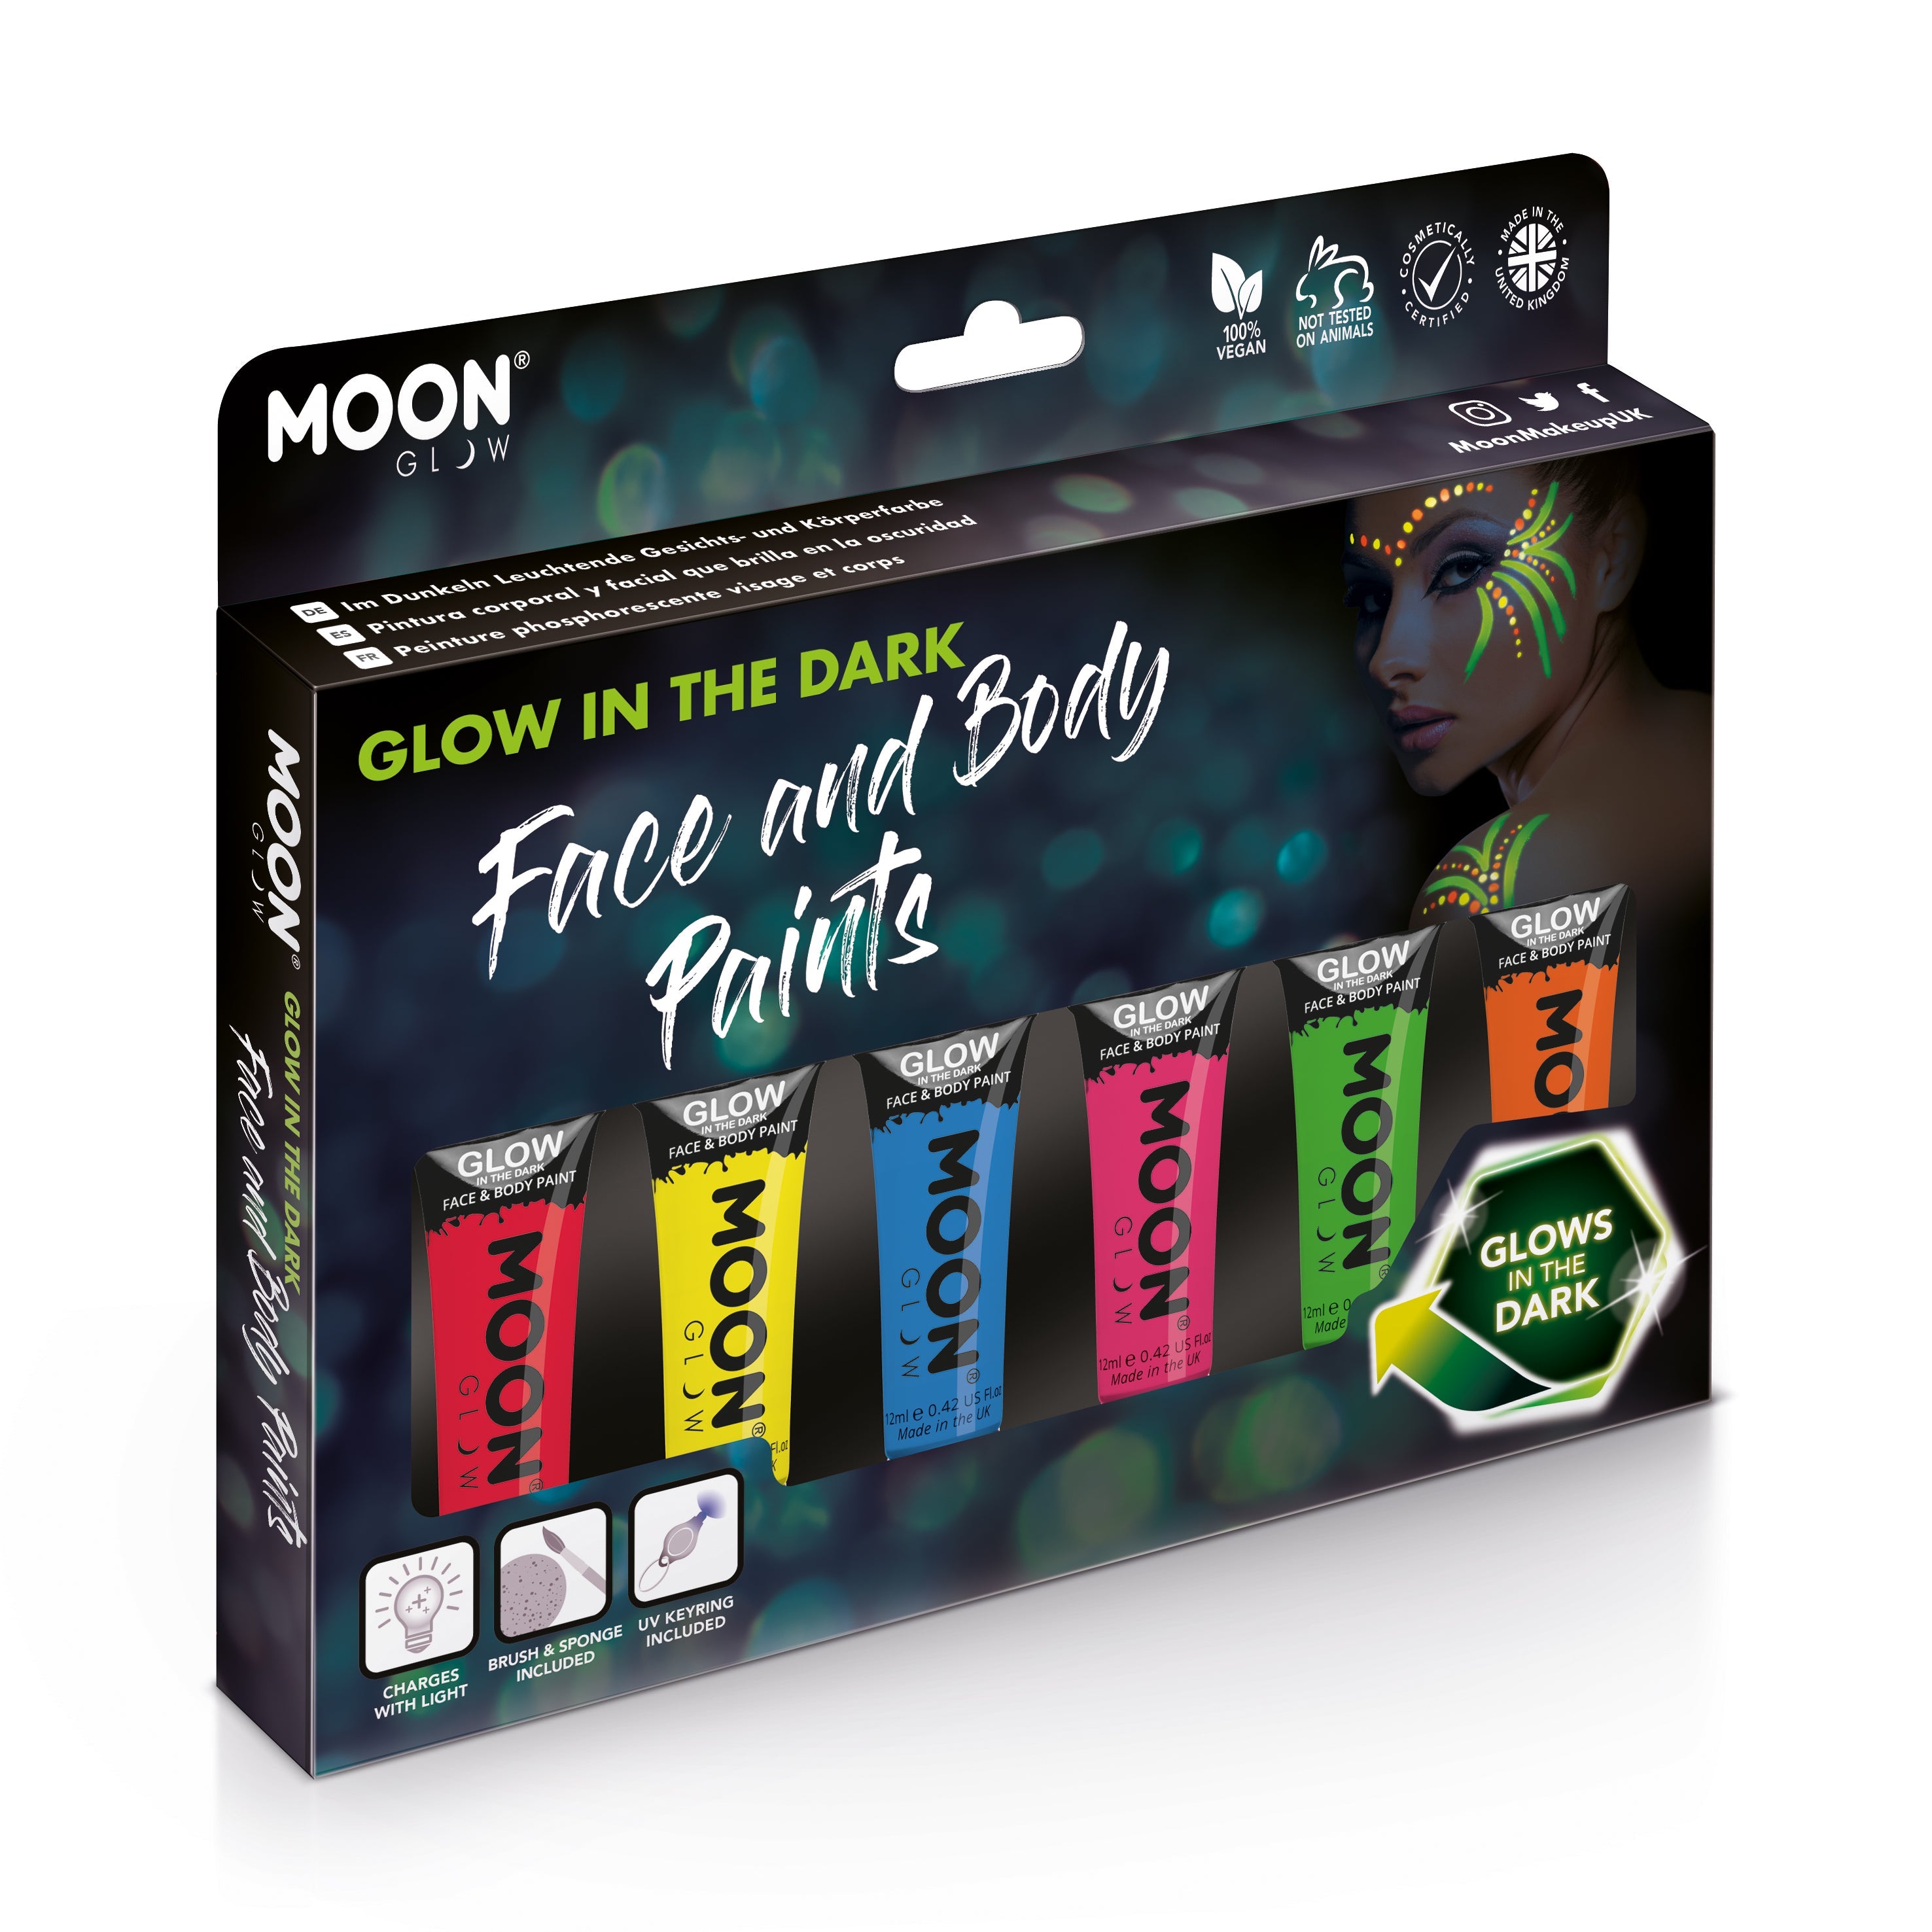 Glow Face & Body Paint Makeup Boxset - 6 tubes, UV light, brush, sponge. Cosmetically certified, FDA & Health Canada compliant, cruelty free and vegan.